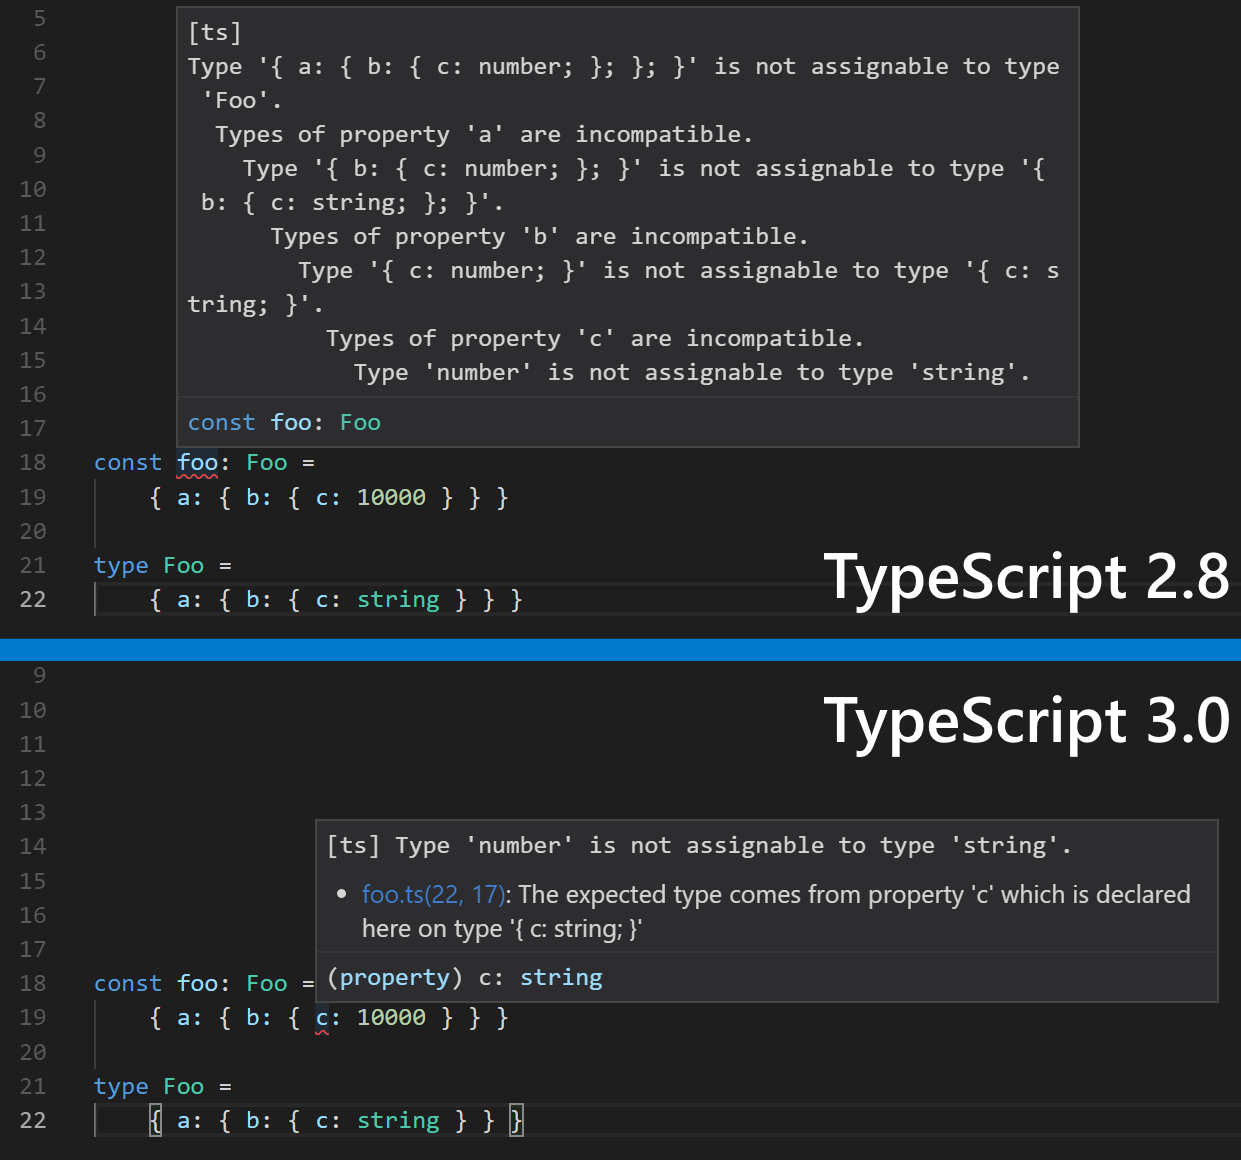 Error messages for the equivalent code/issue in JSX compared between TypeScript 2.8 and TypeScript 3.0. In TypeScript 3.0, the message is dramatically shorter and has a related span, while still providing context.